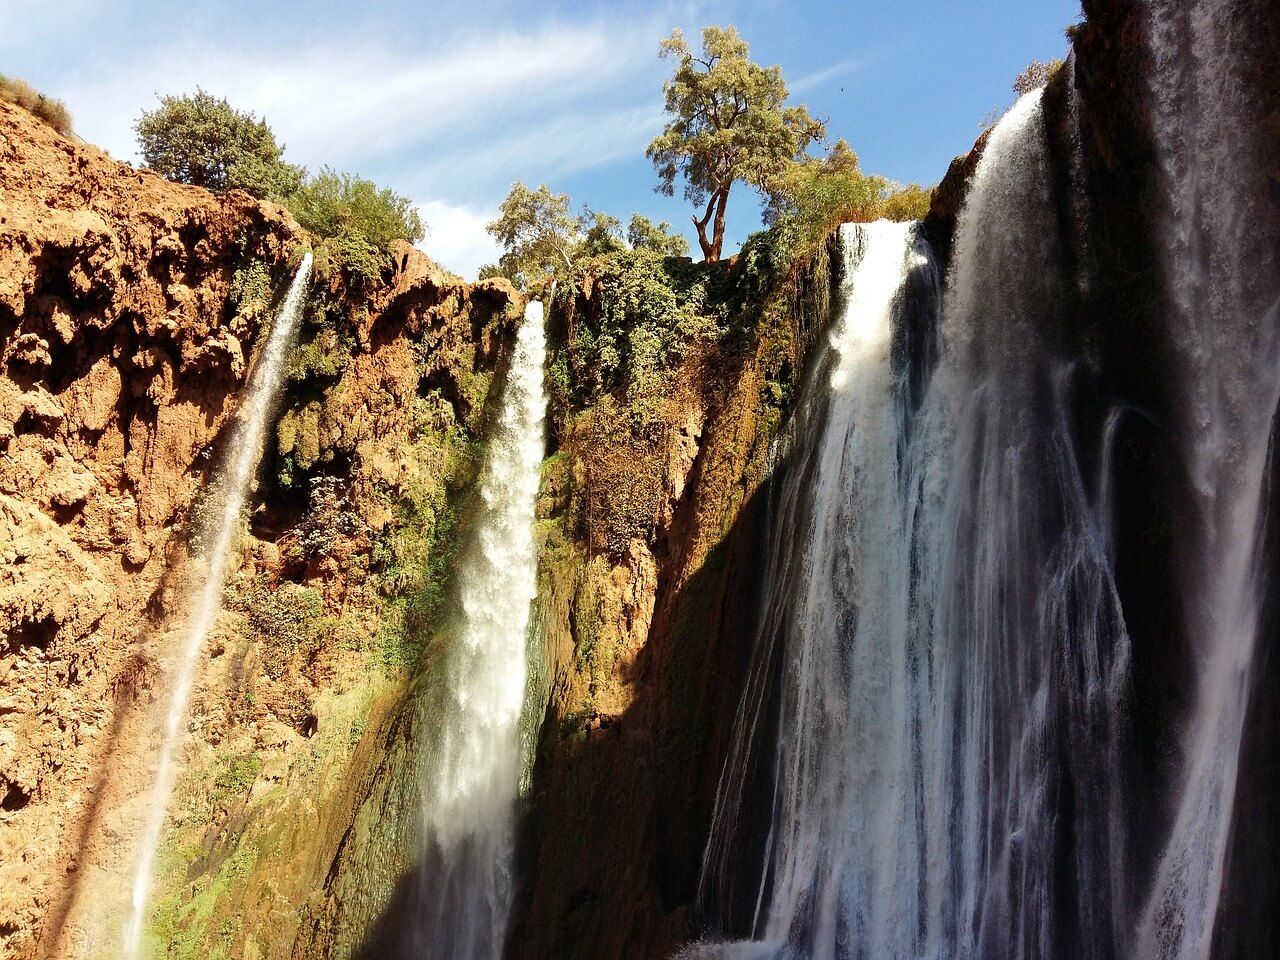 Day trip to ouzoud waterfalls from Marrakech